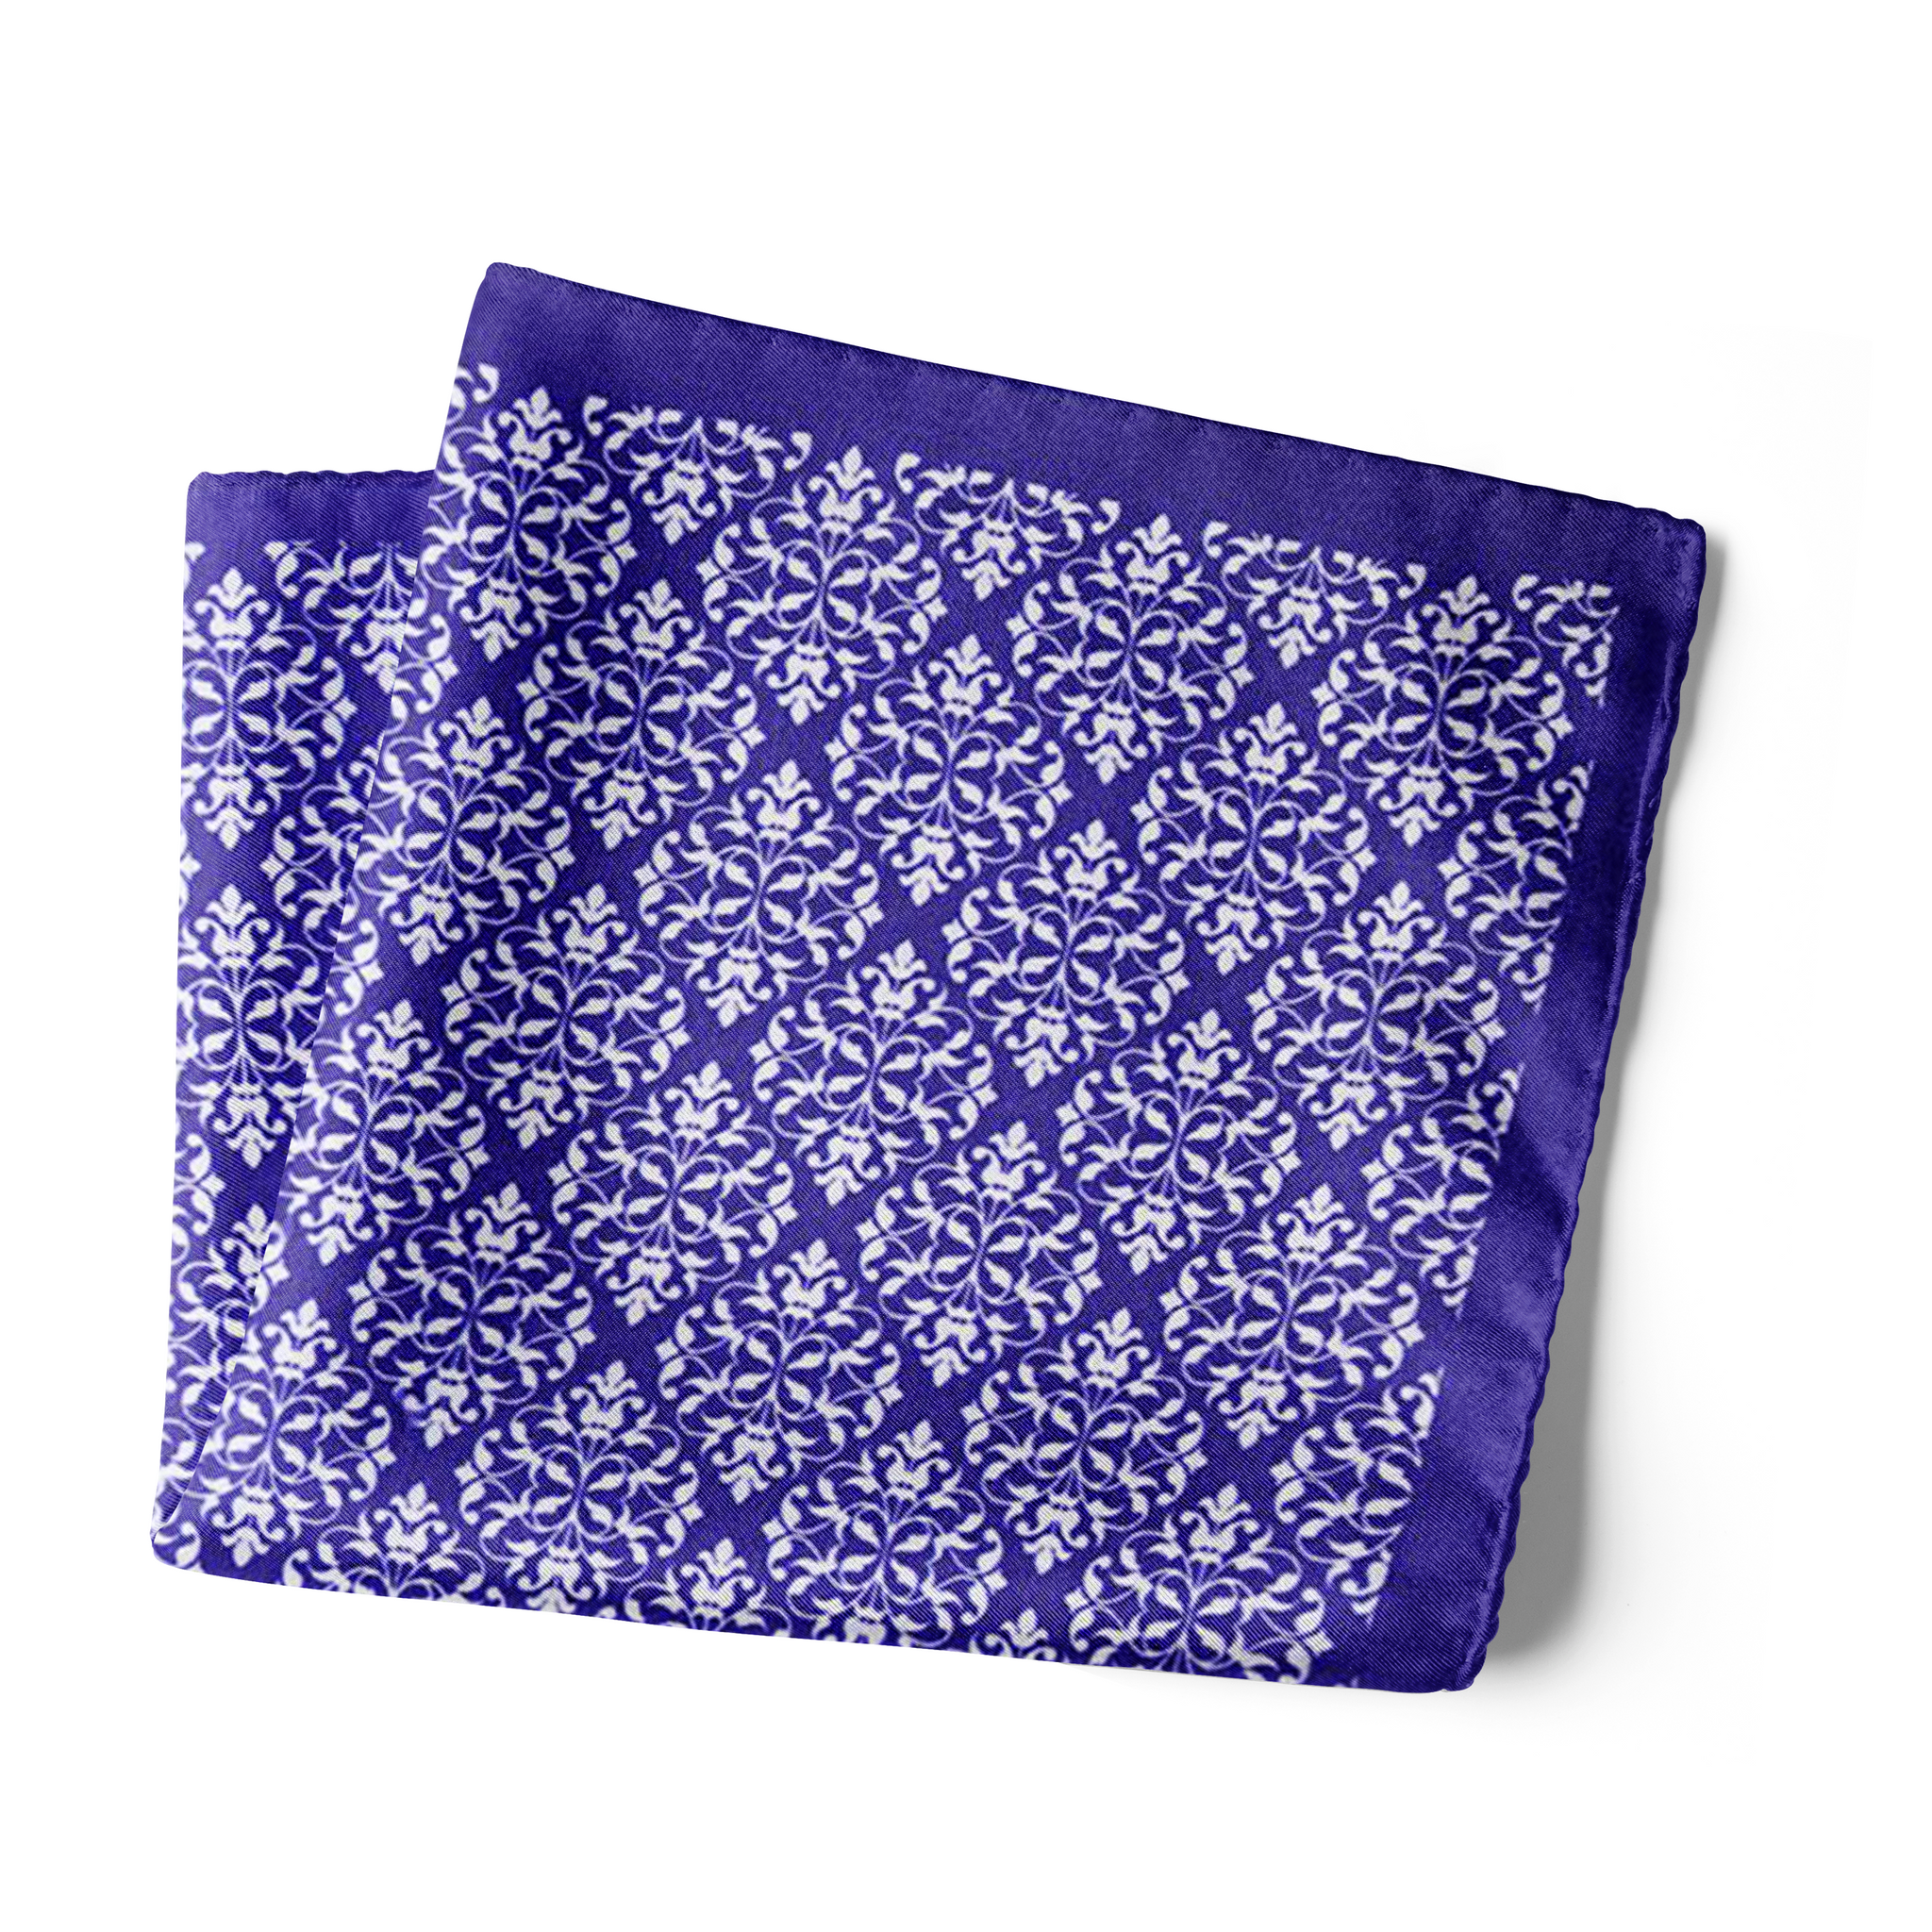 Chokore Blue & White Silk Pocket Squares from Indian at Heart collection